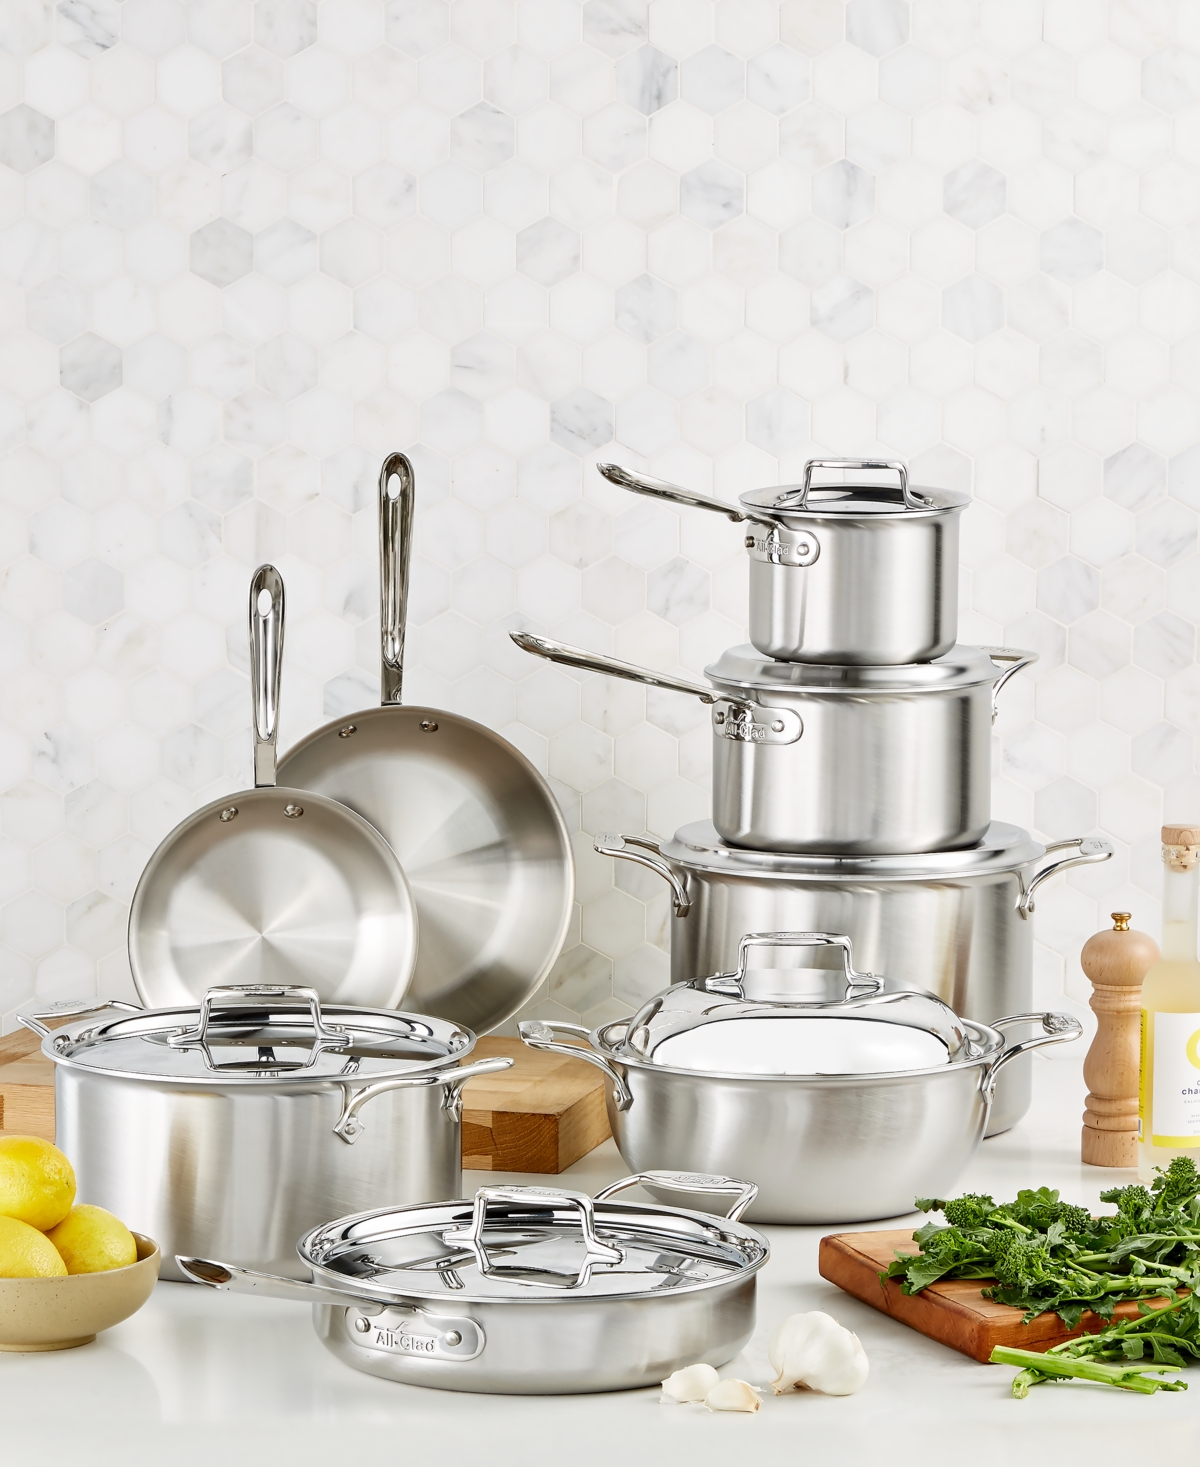 All-Clad D5 Brushed Stainless Steel 14-Pc. Cookware Set